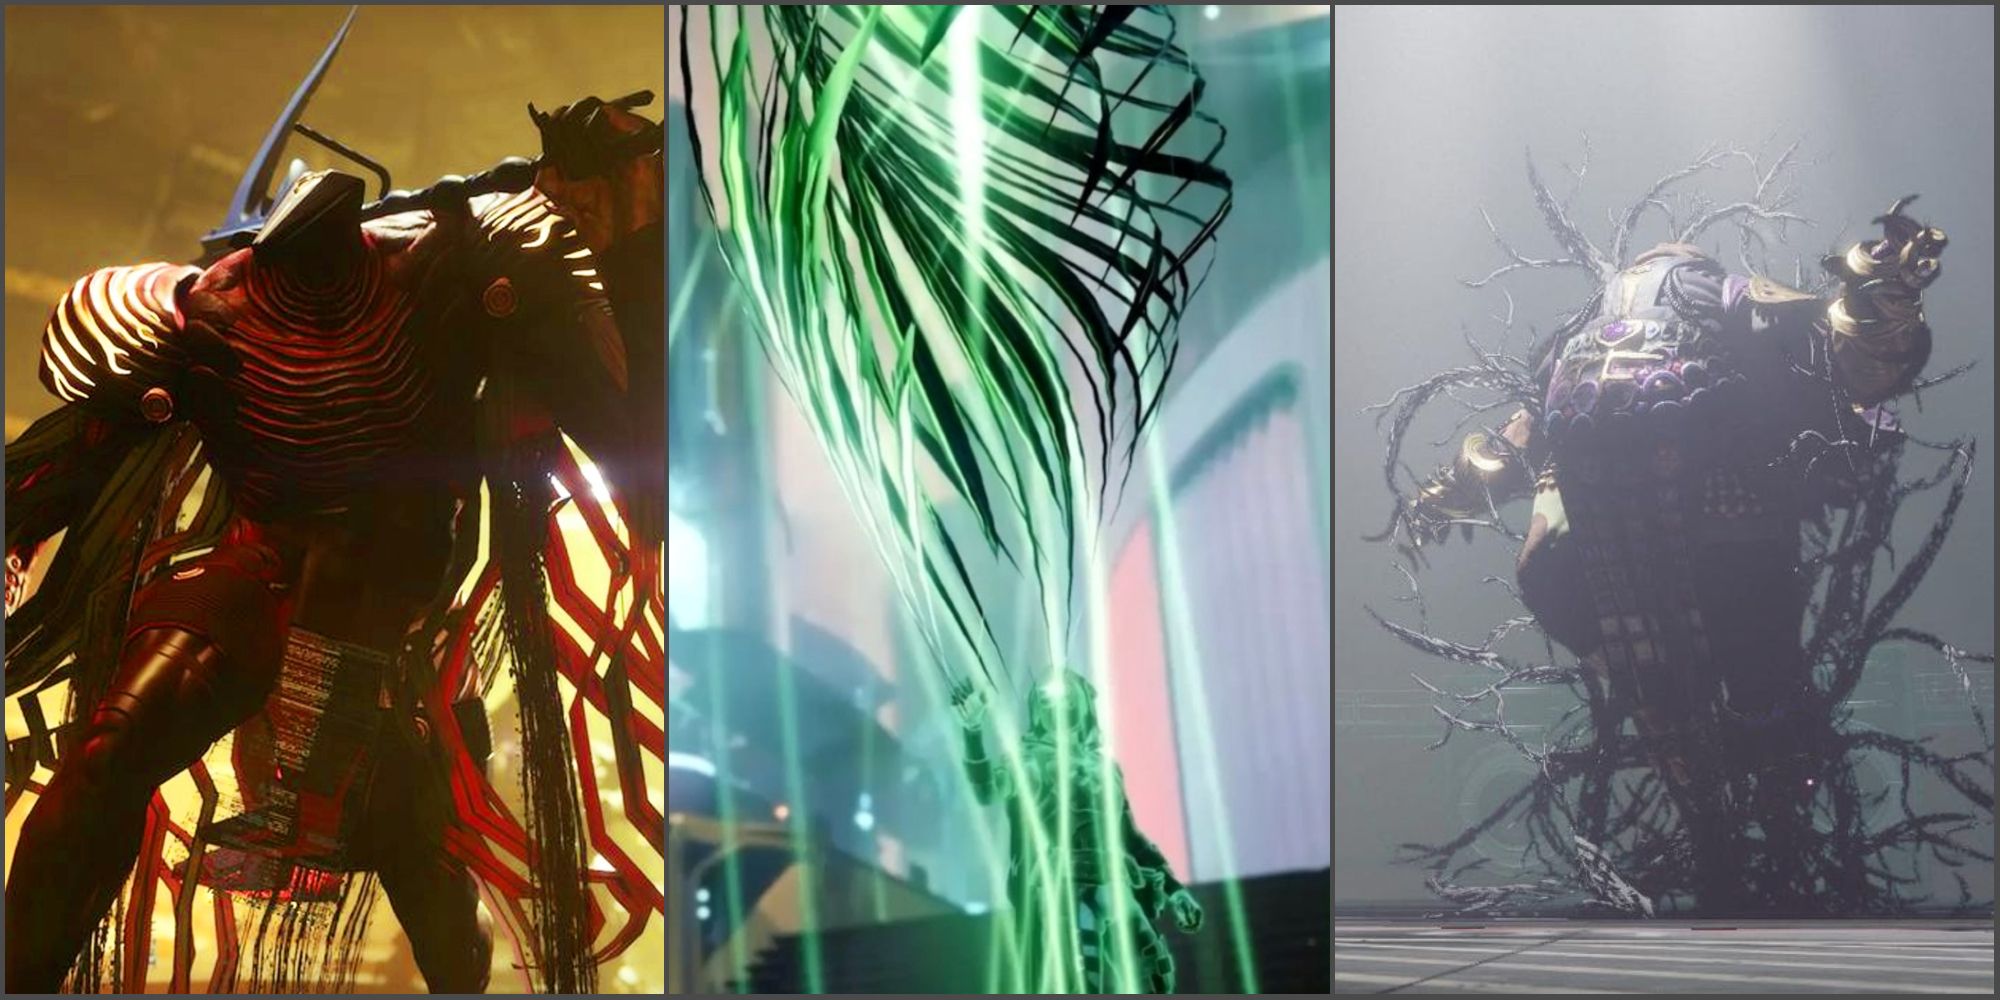 Destiny 2 Lightfall: A close-up of the Tormentor enemy, a Hunter accepting Strand, and Calus' death